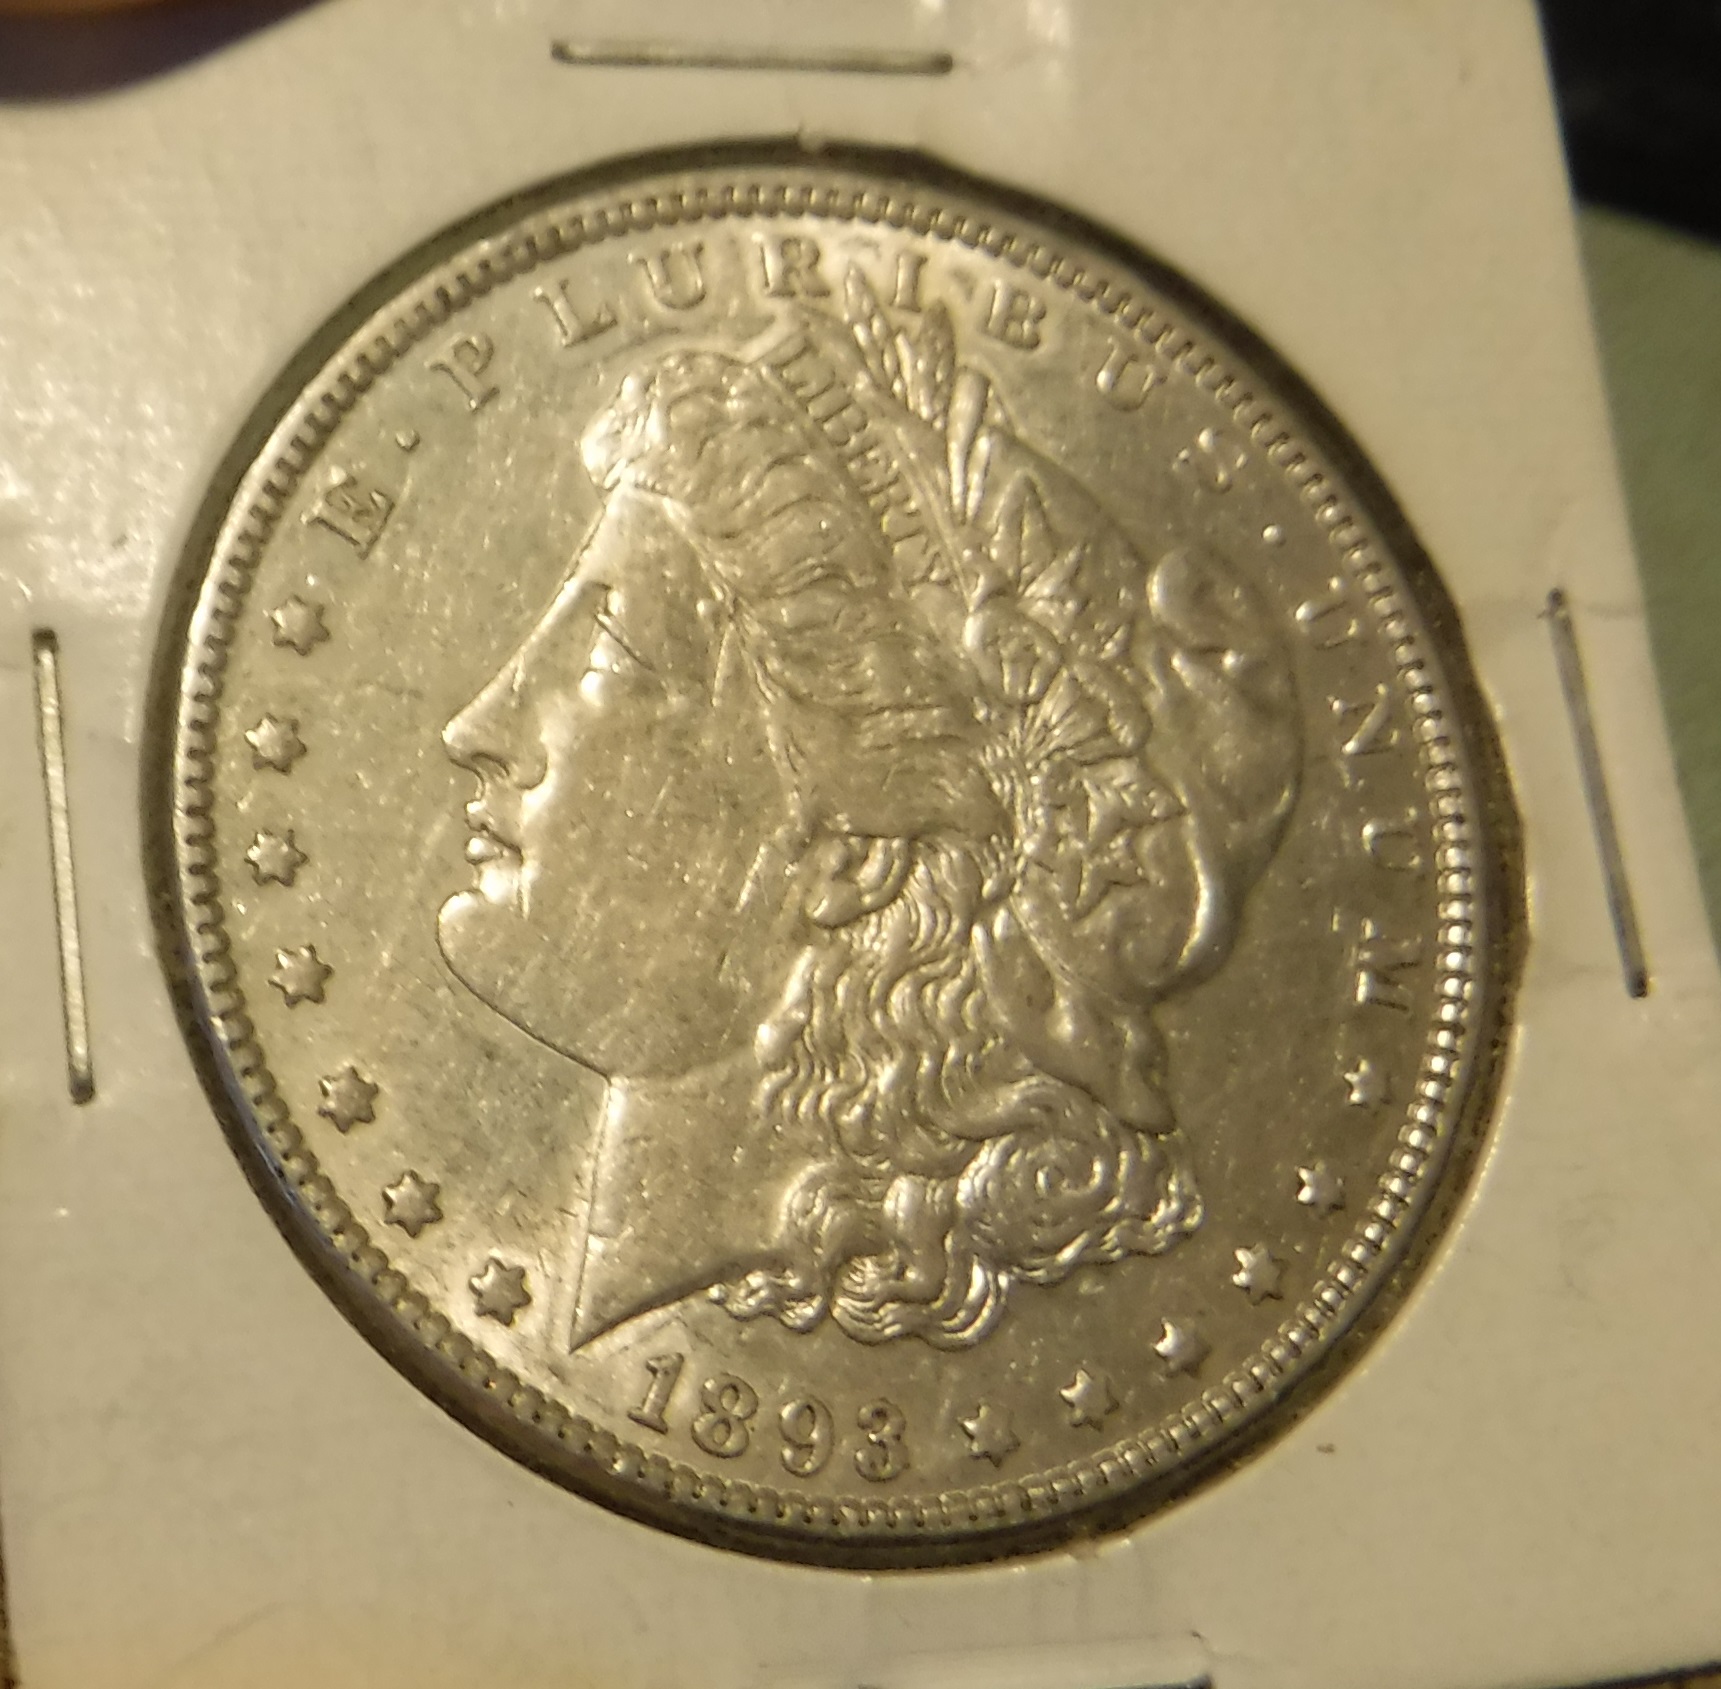 Photo I took of the Morgan silver dollar that I have up for sale on eBay